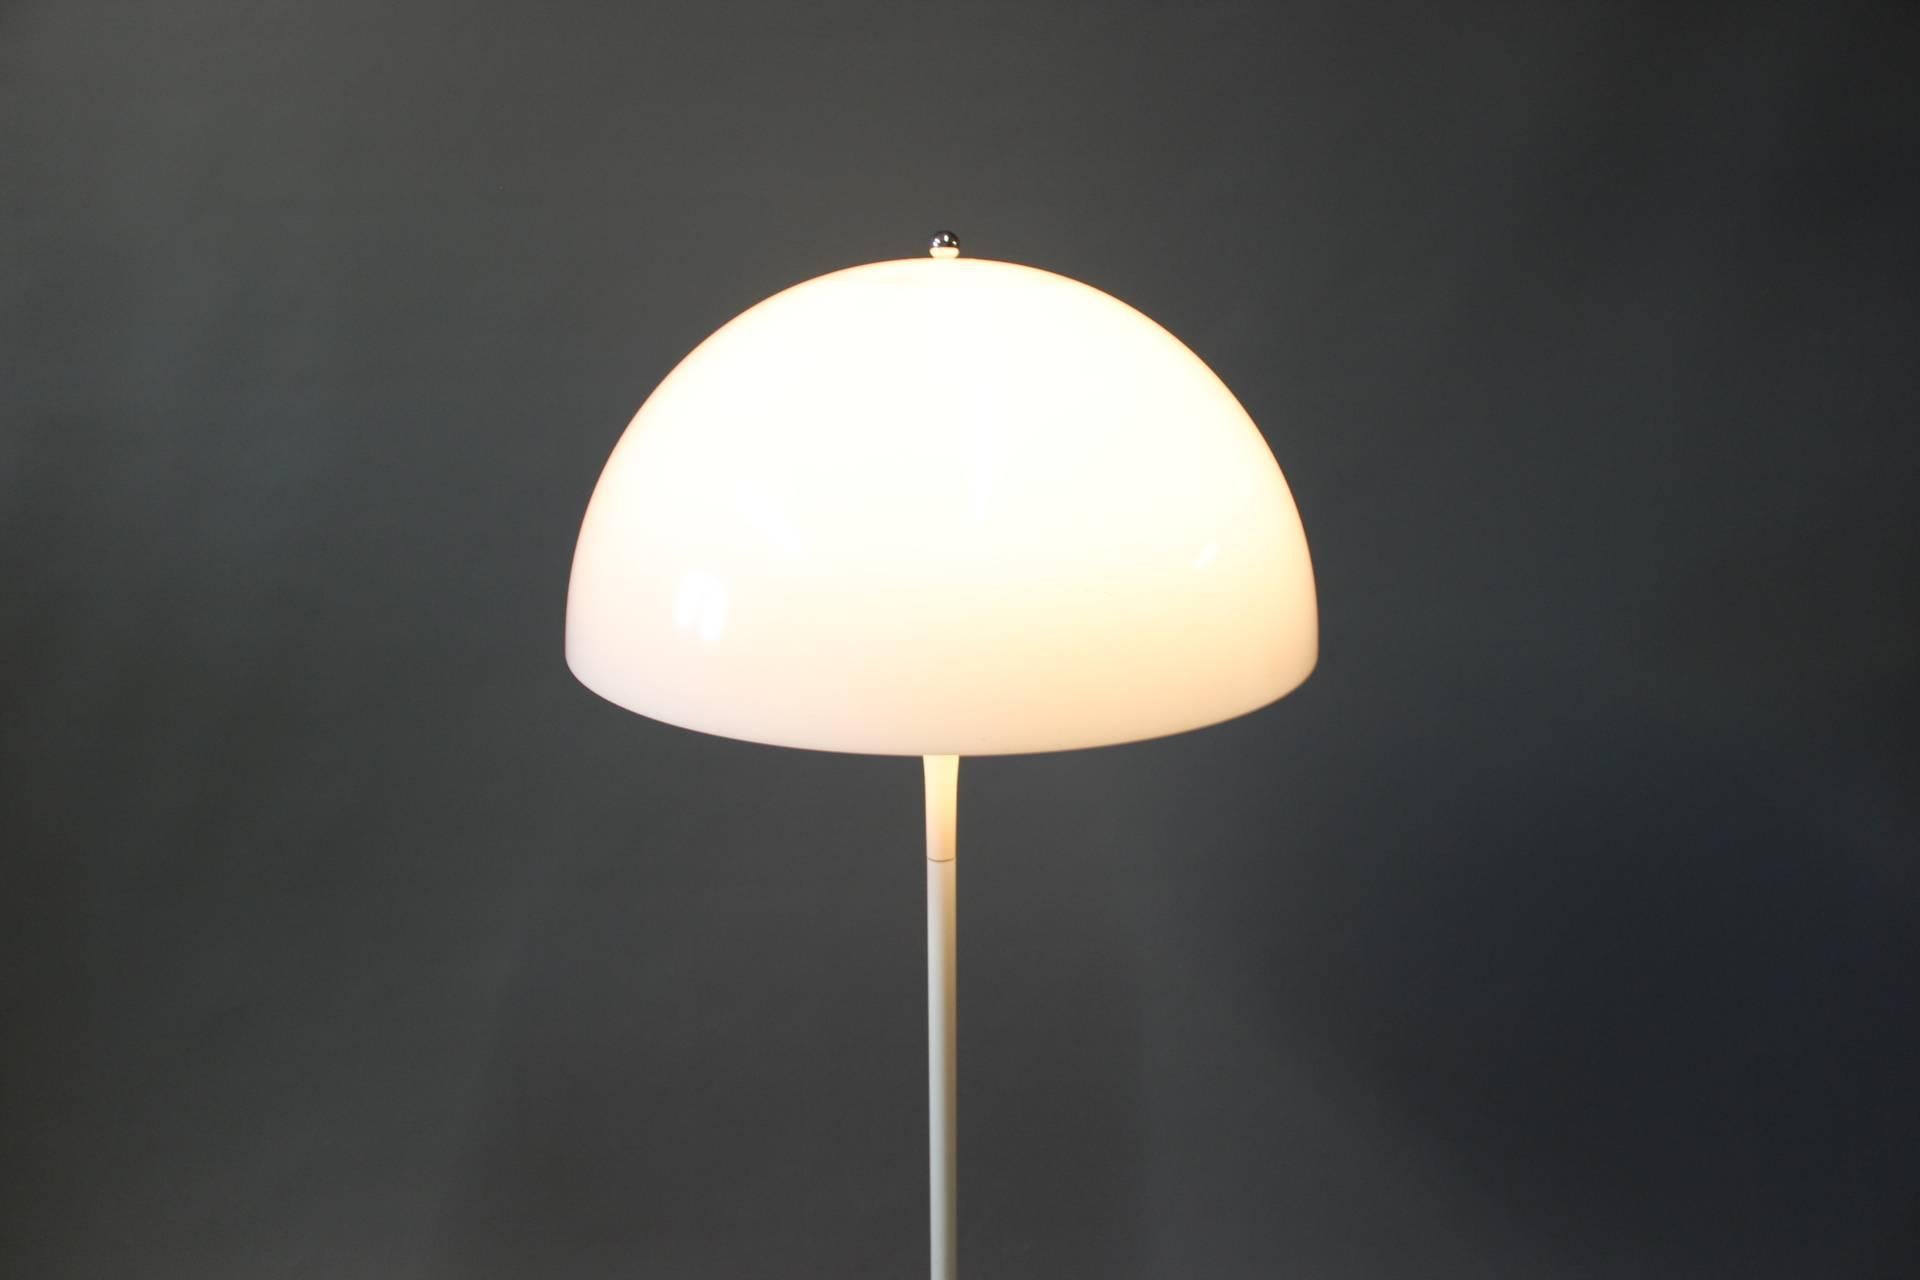 Panthella floor lamp designed by Verner Panton in 1971 and manufactured by Louis Poulsen in the late 1970s. The shade is made of acrylic, the stem White lacquered steel and the foot of plastic.